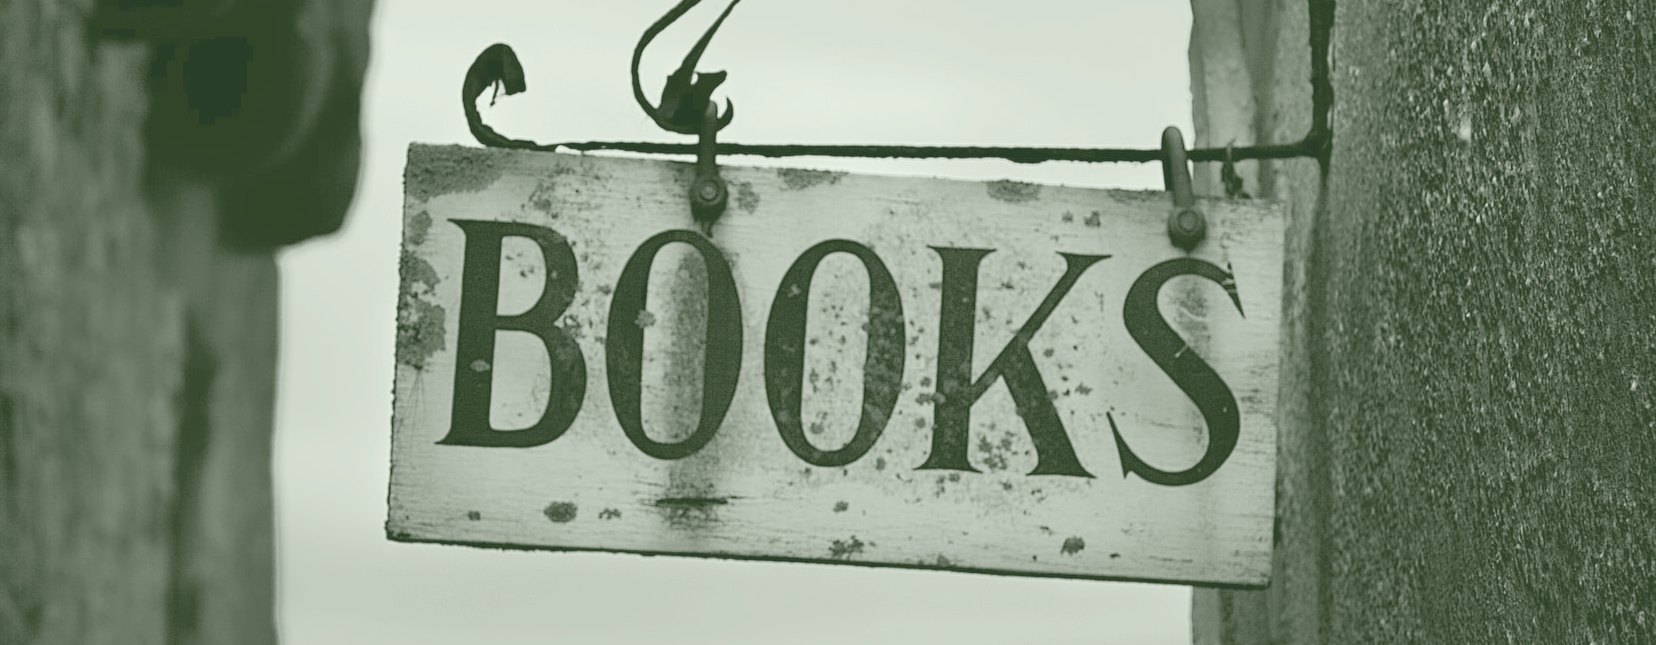 Vintage Books Store Outdorr Sign (by Paolo Chiabrando